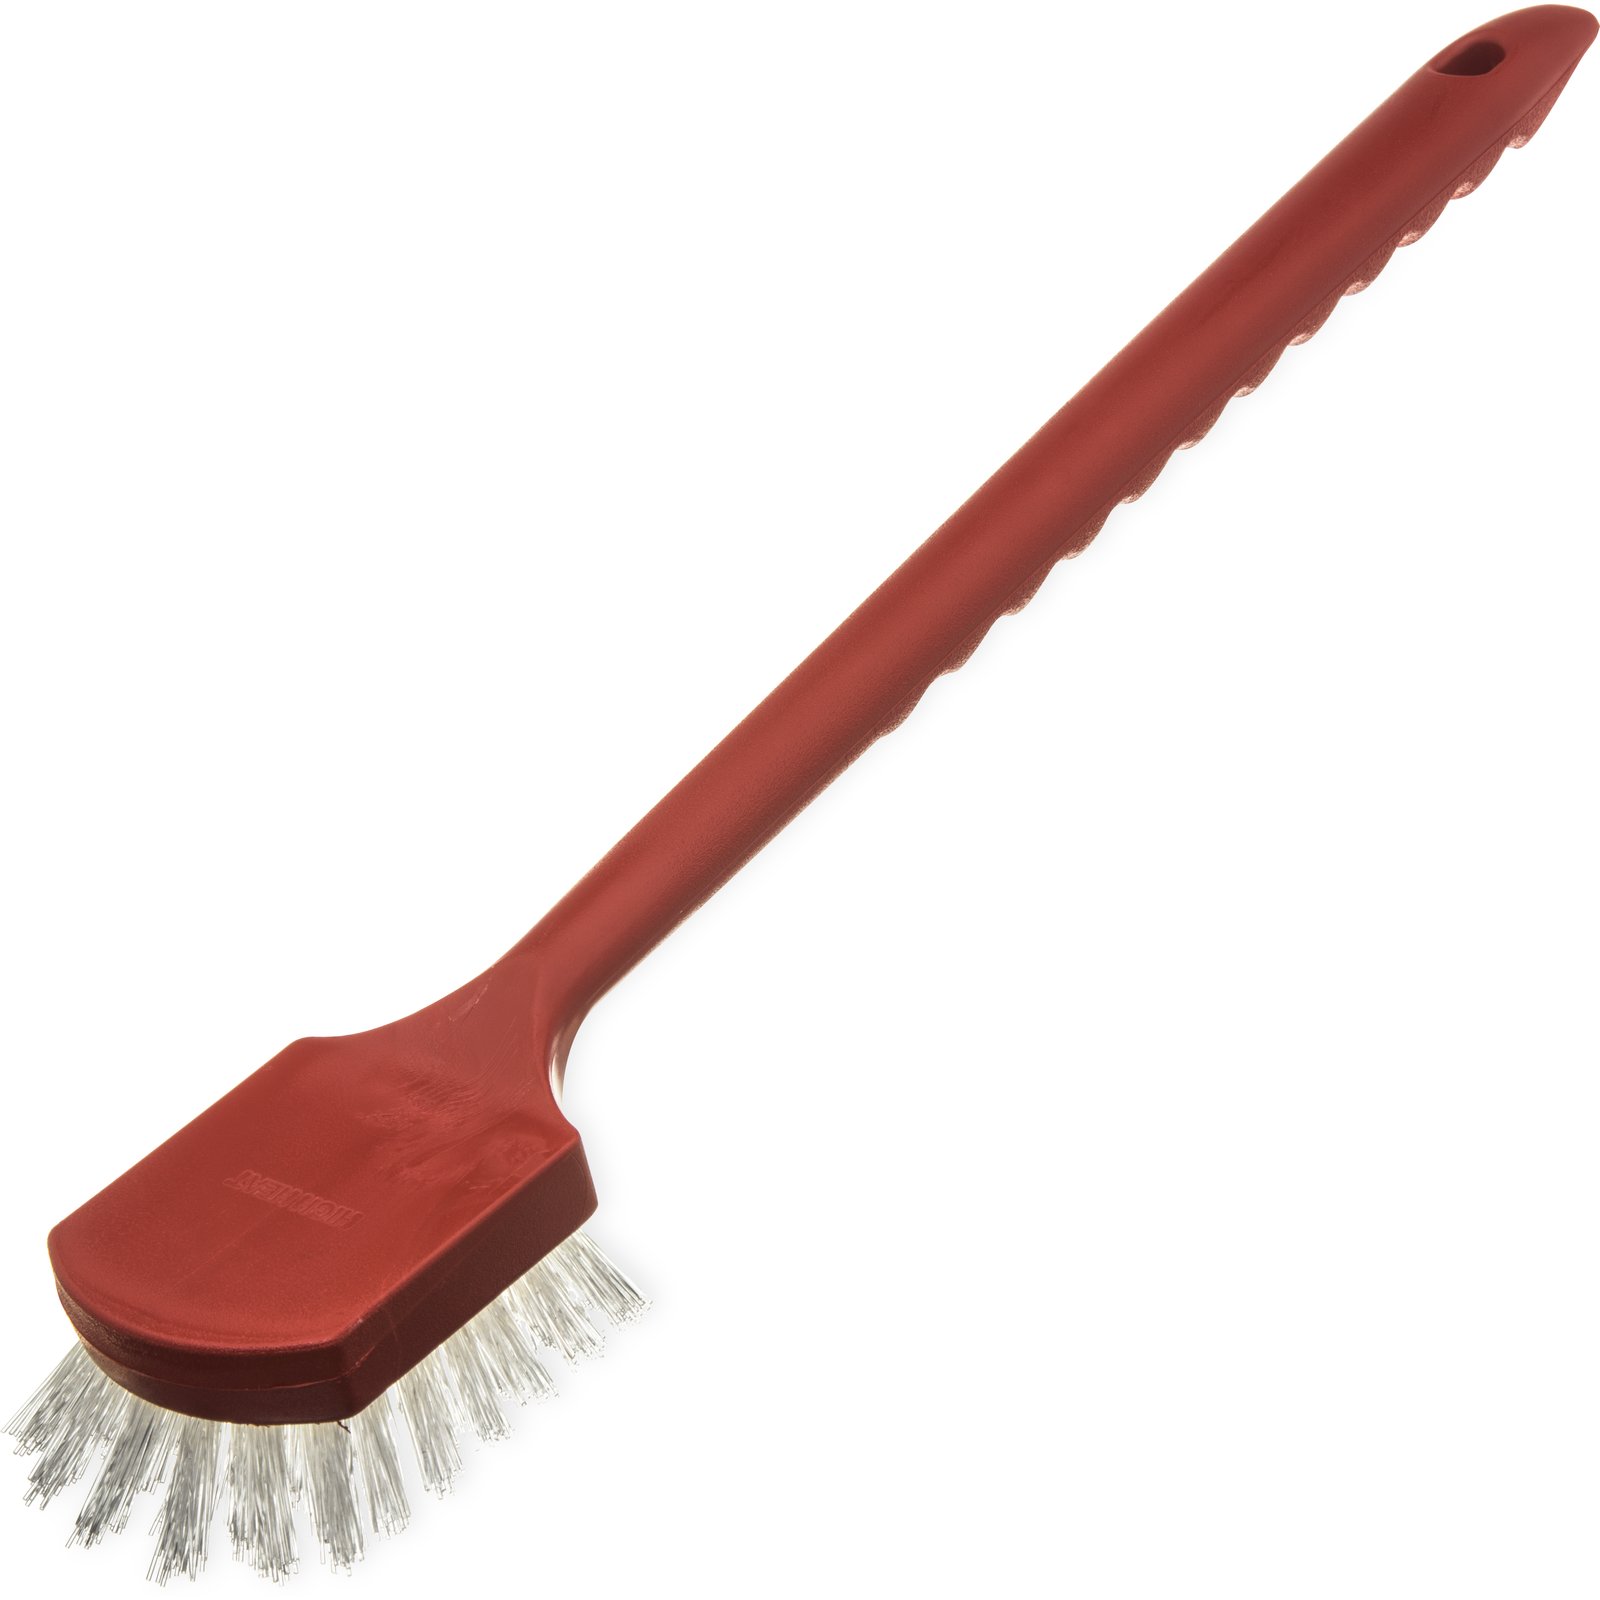 4011105 - L-Tipped Fryer High Heat Brush 23 - Red